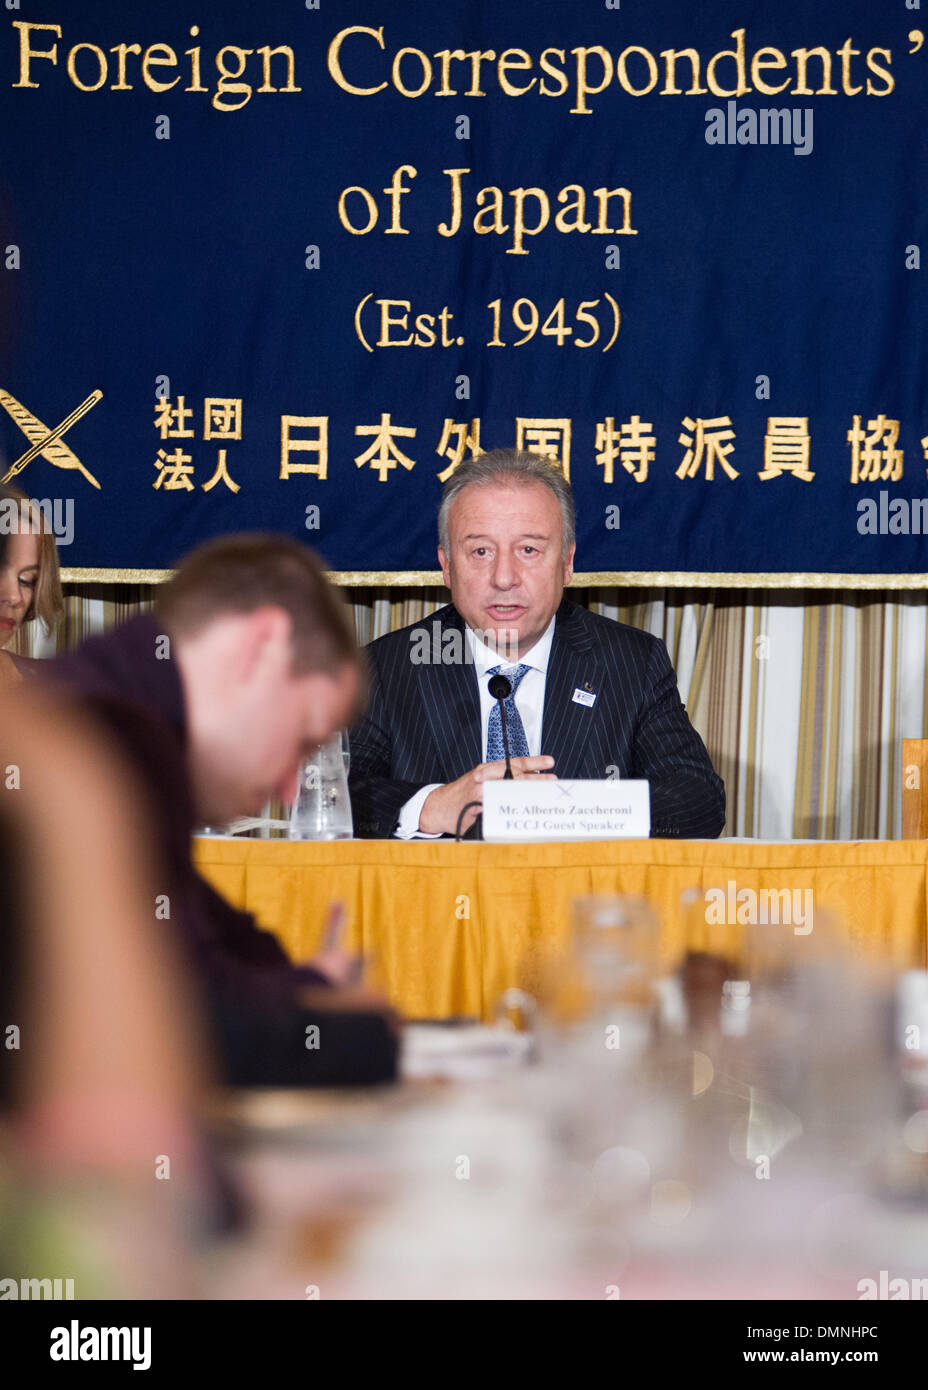 Tokyo, Japan. 16th Dec, 2013. Alberto Zaccheroni, Italian head coach of Japan's National Football Team, speaks to the media during a news conference at Tokyo's Foreign Correspondents' Club of Japan on Monday, December 16, 2013. Zaccheroni expressed his views on Japan's chances at the 2014 FIFA World Cup in Brazil. Credit:  AFLO/Alamy Live News Stock Photo